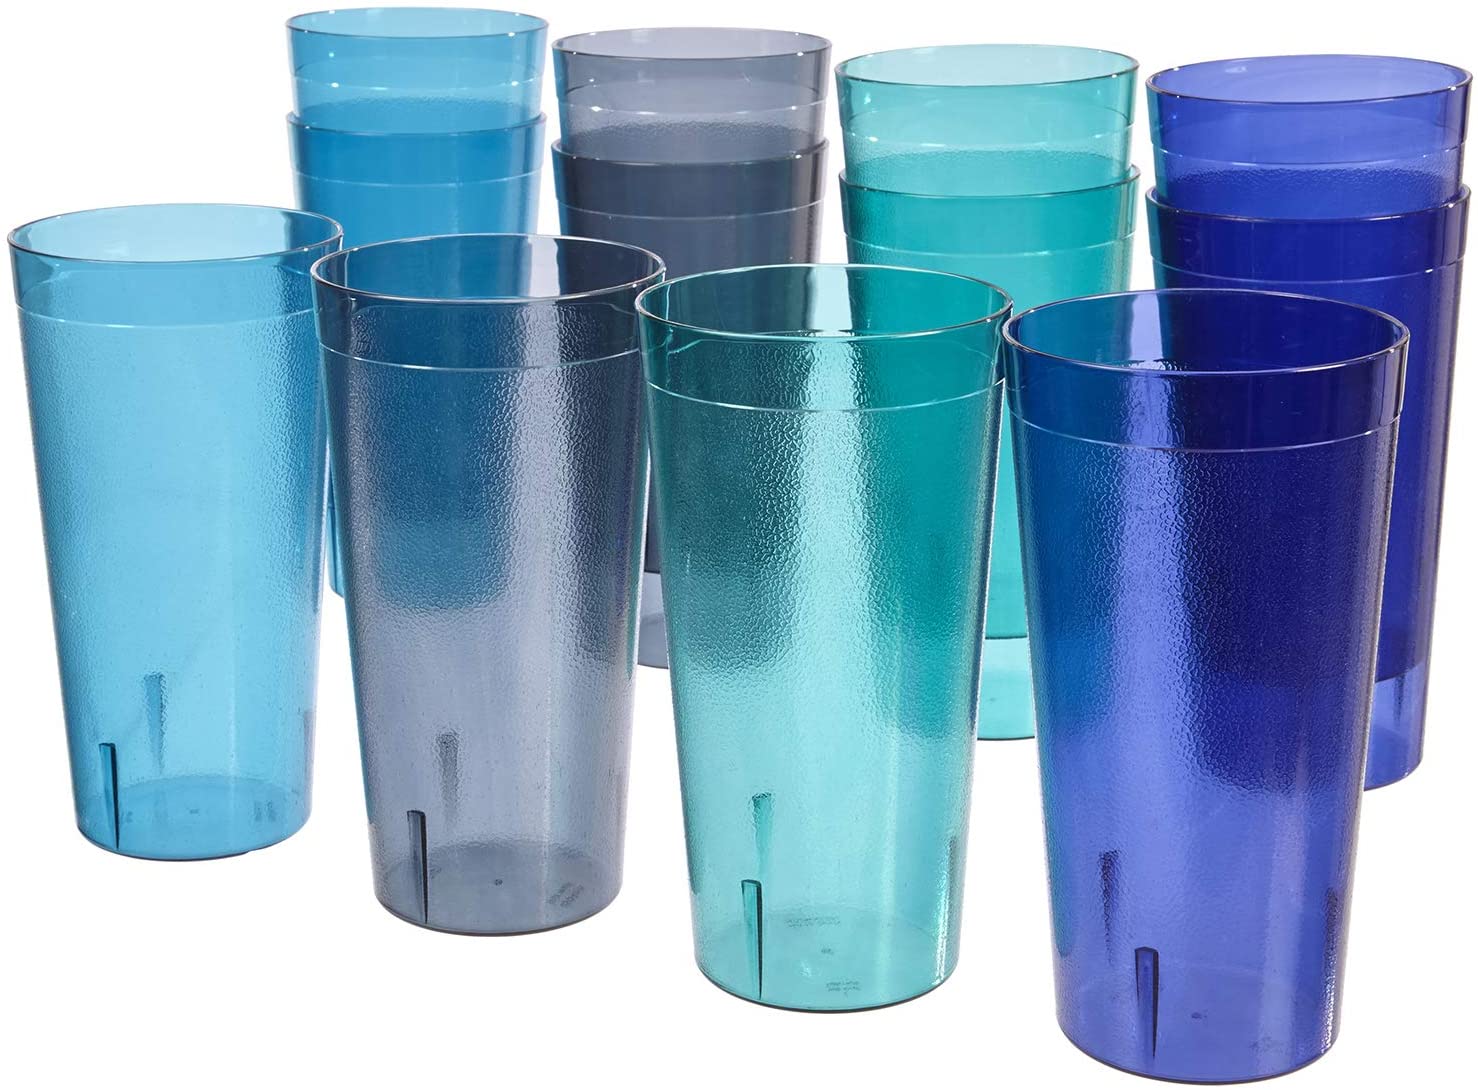 US Acrylic Cafe Shatter-Proof Plastic Tumblers & Water Glasses, 12-Count